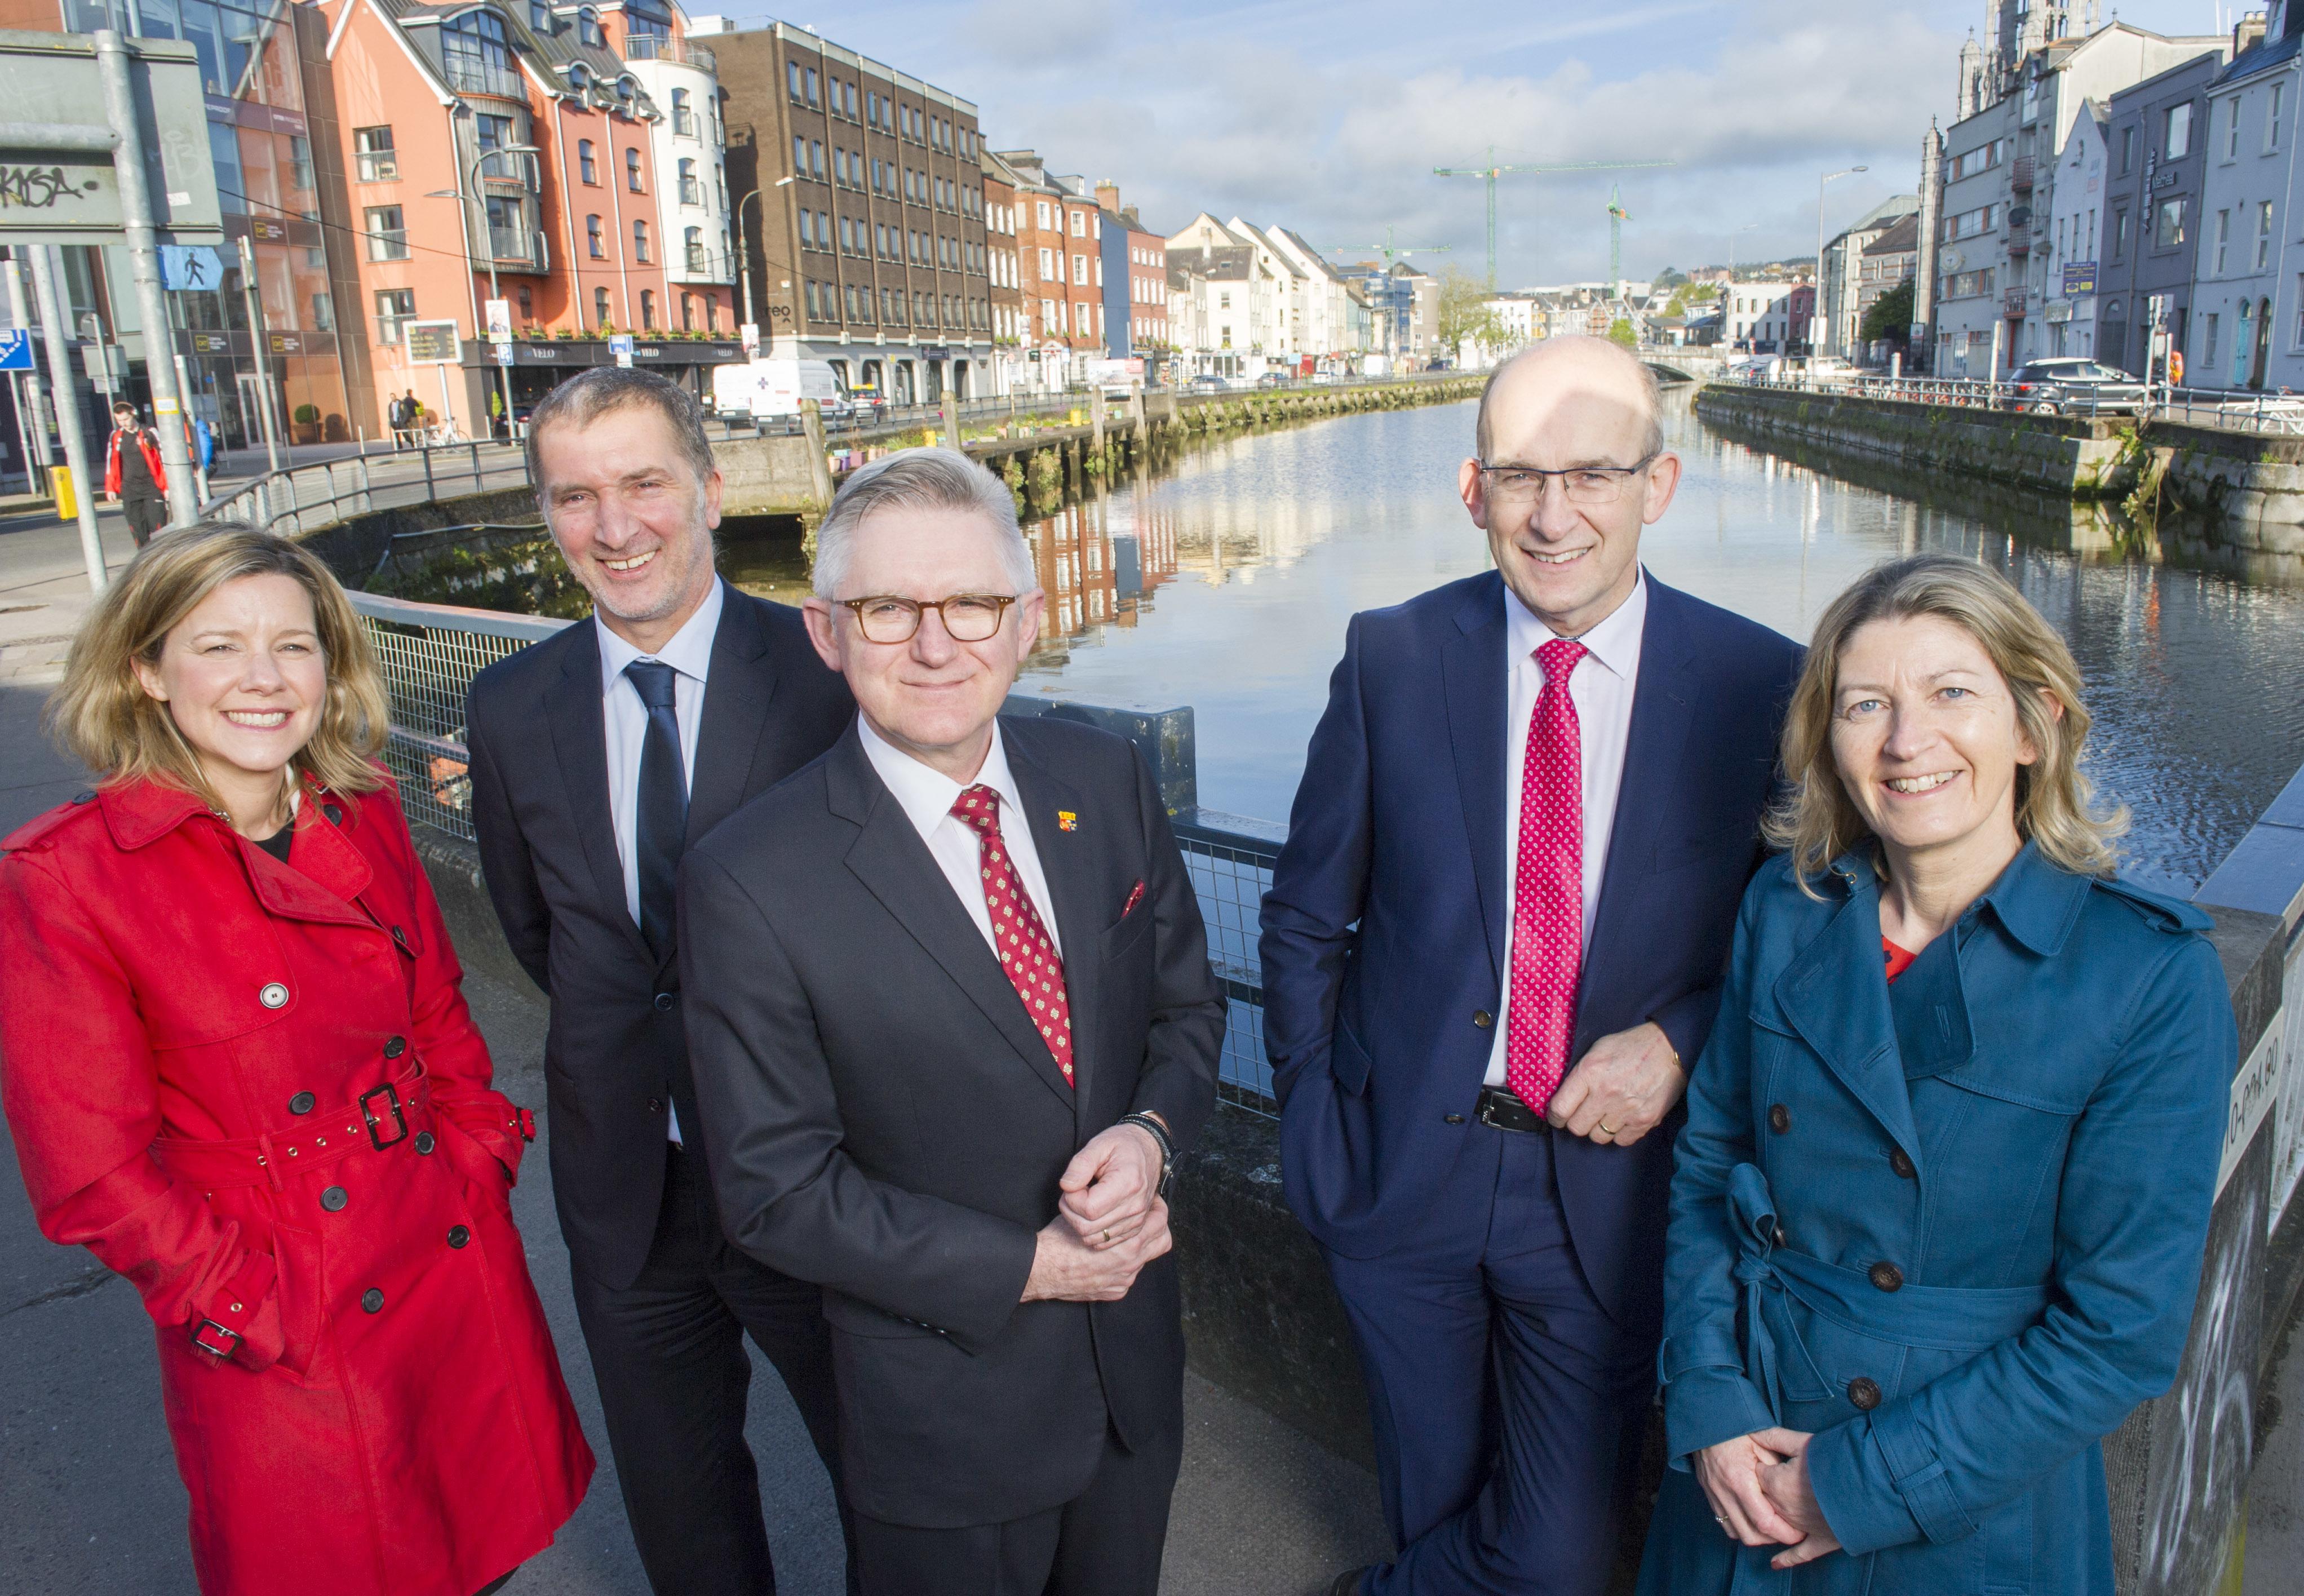 New business school for Cork city centre, as UCC & Dairygold sign contracts